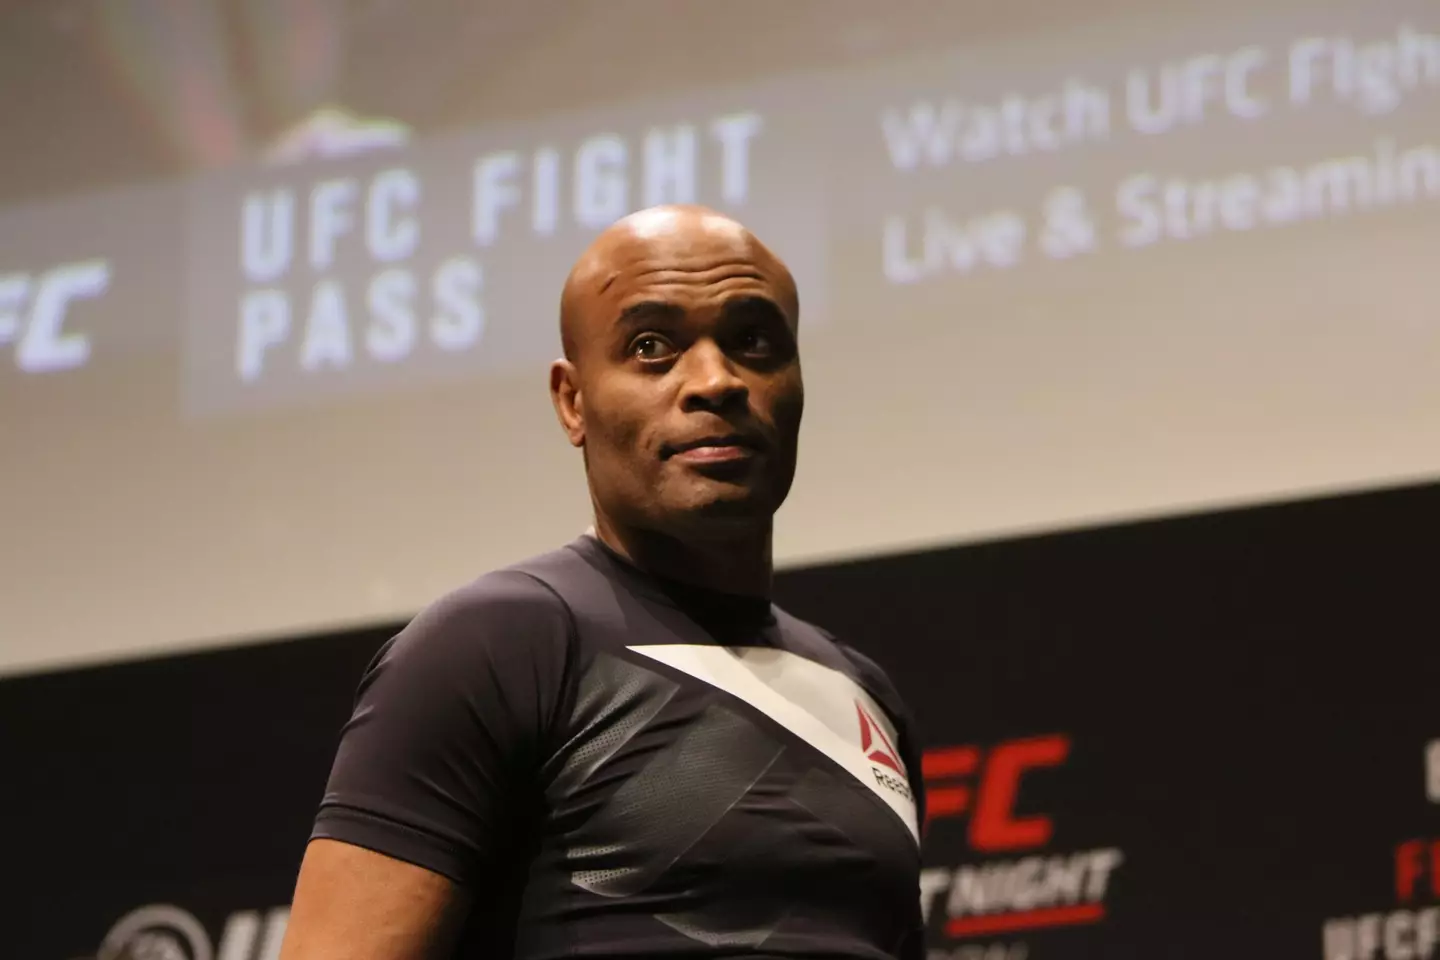 Anderson Silva is a former UFC middleweight champion.